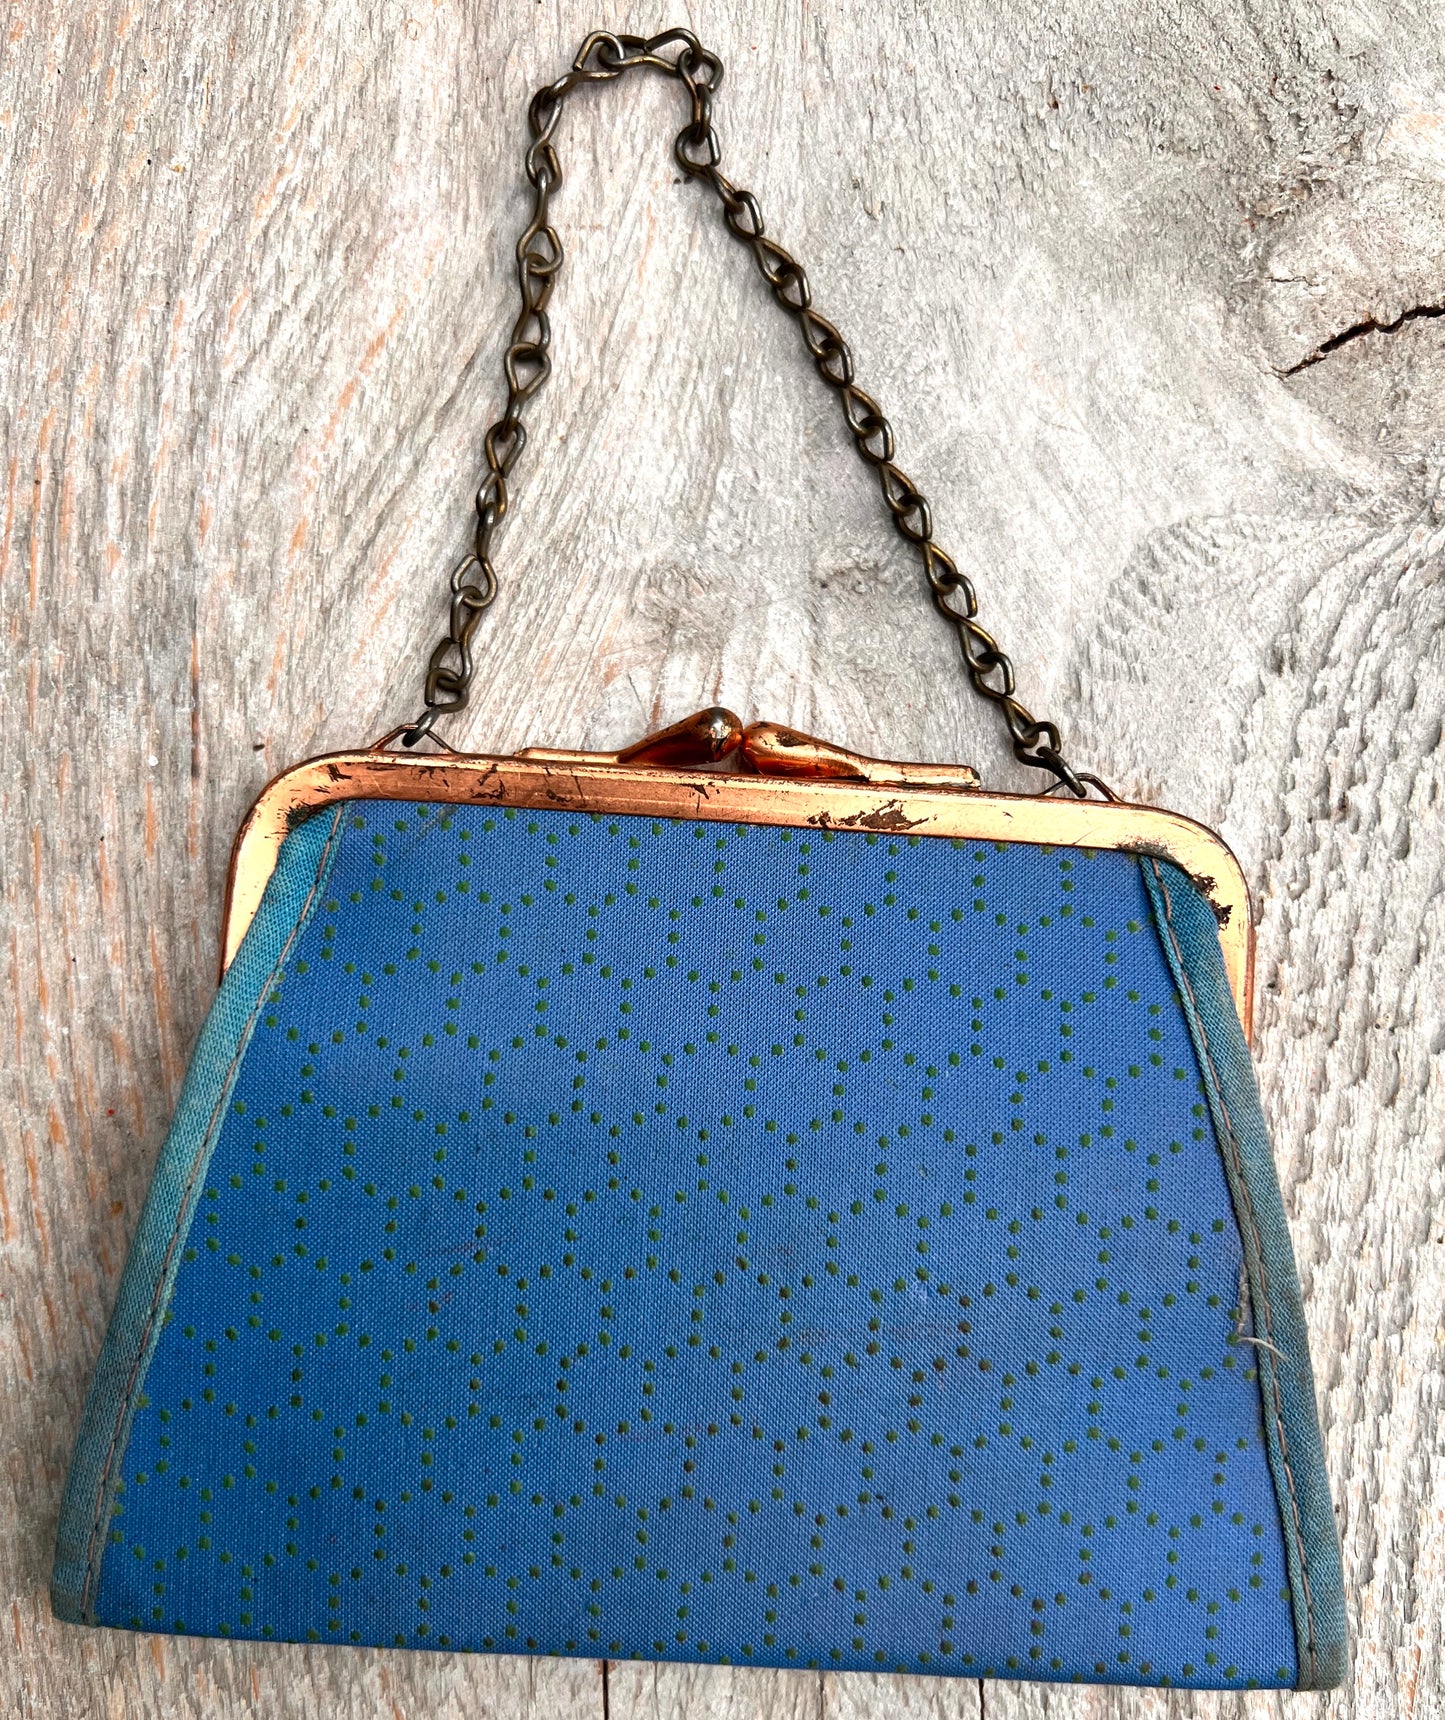 1940s/50s Blue and Green Purse